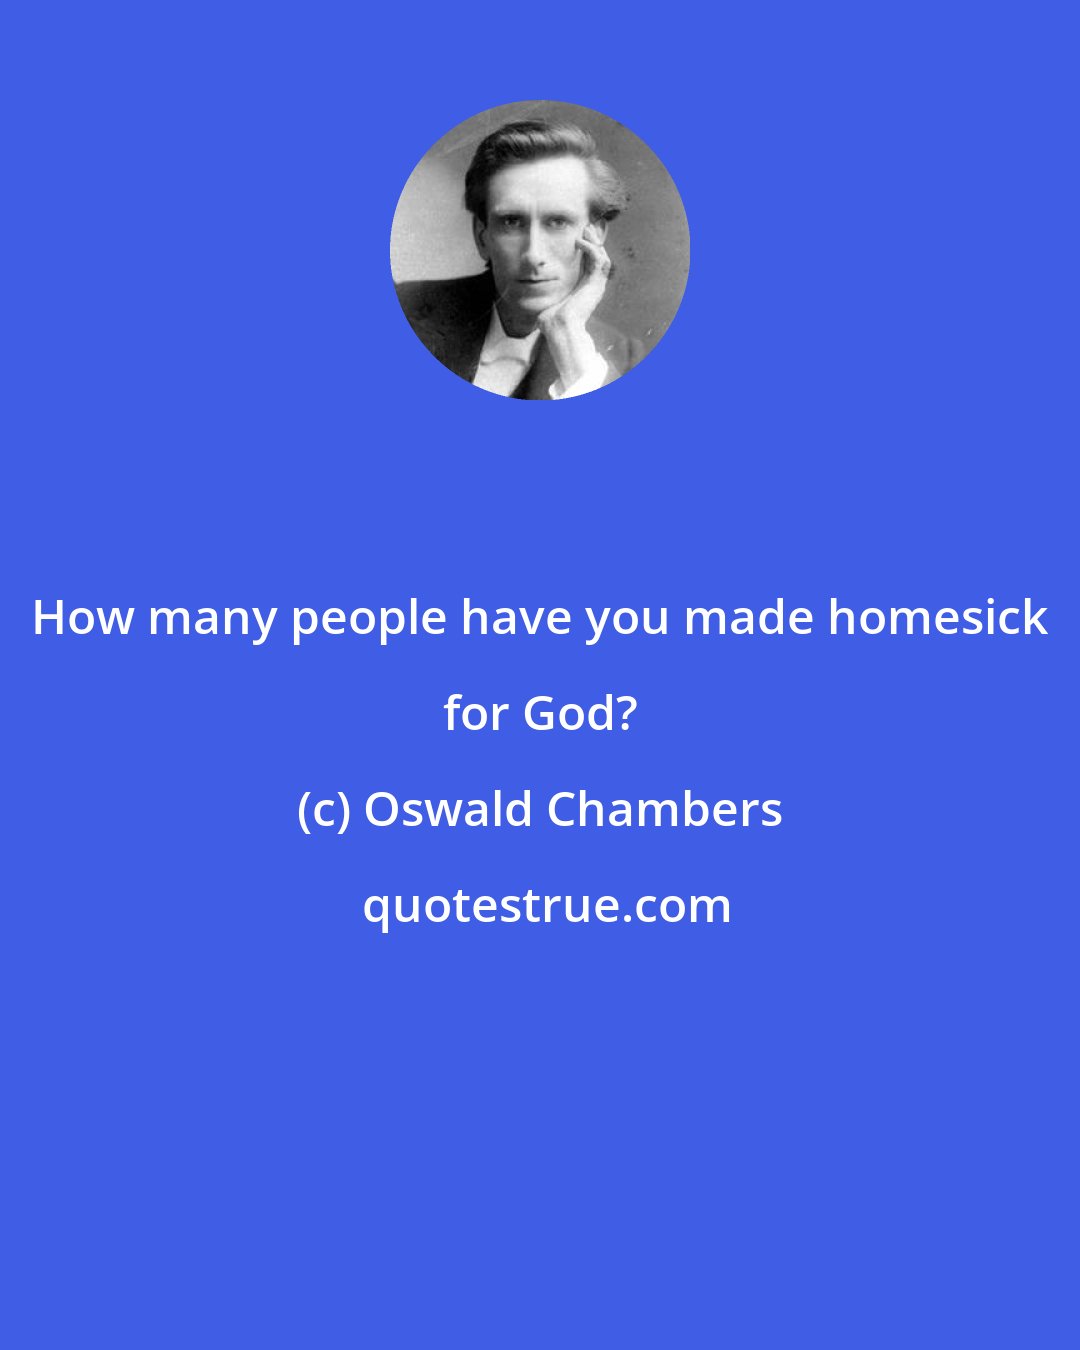 Oswald Chambers: How many people have you made homesick for God?